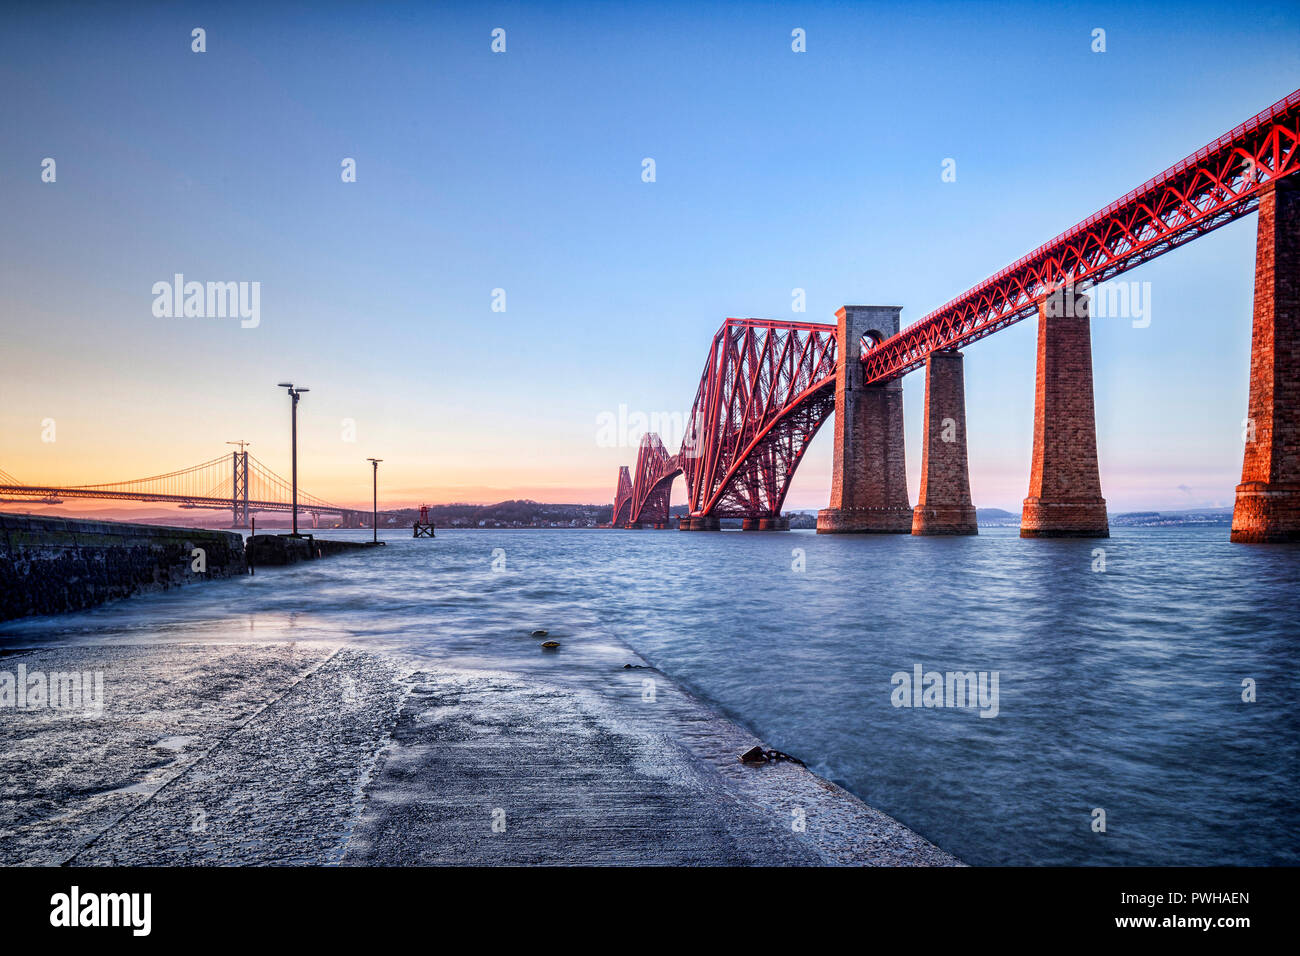 Forth Rail bridge, Queensferry, Edinburgh, East Lothian, Scotland, UK, one of the most famous bridges in the world and an icon of Scotland, at sunset. Stock Photo